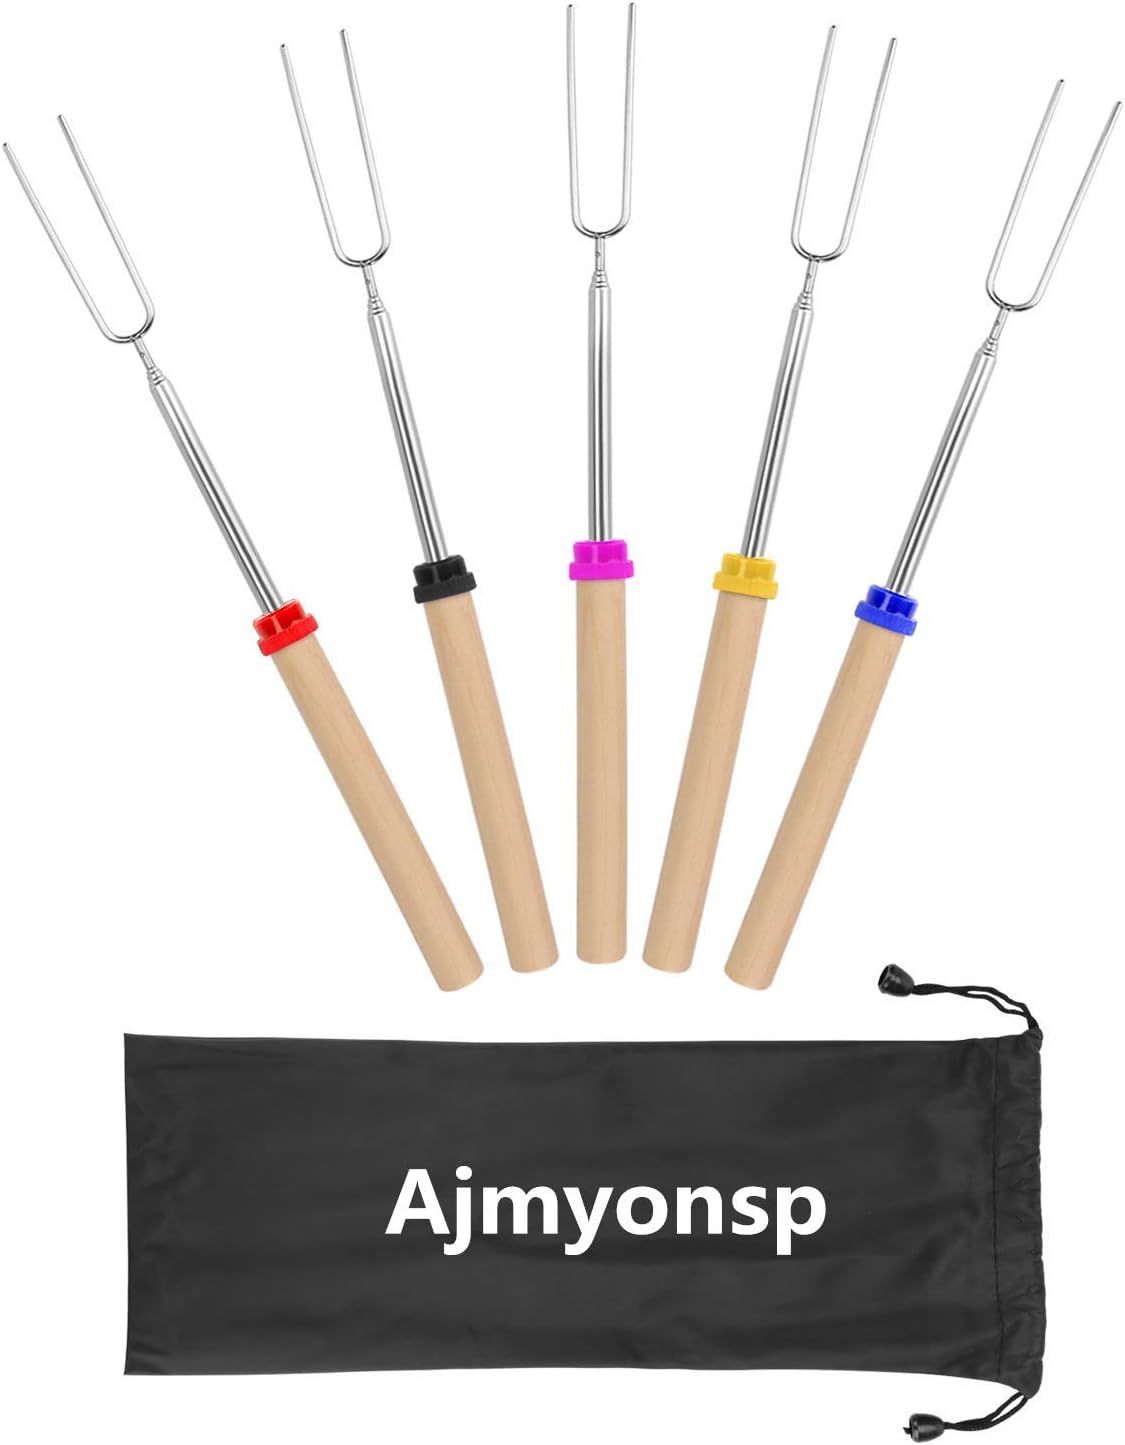 Ajmyonsp Marshmallow Roasting Sticks with Wooden Handle Extendable Forks Set of 5Pcs Telescoping ... | Amazon (US)